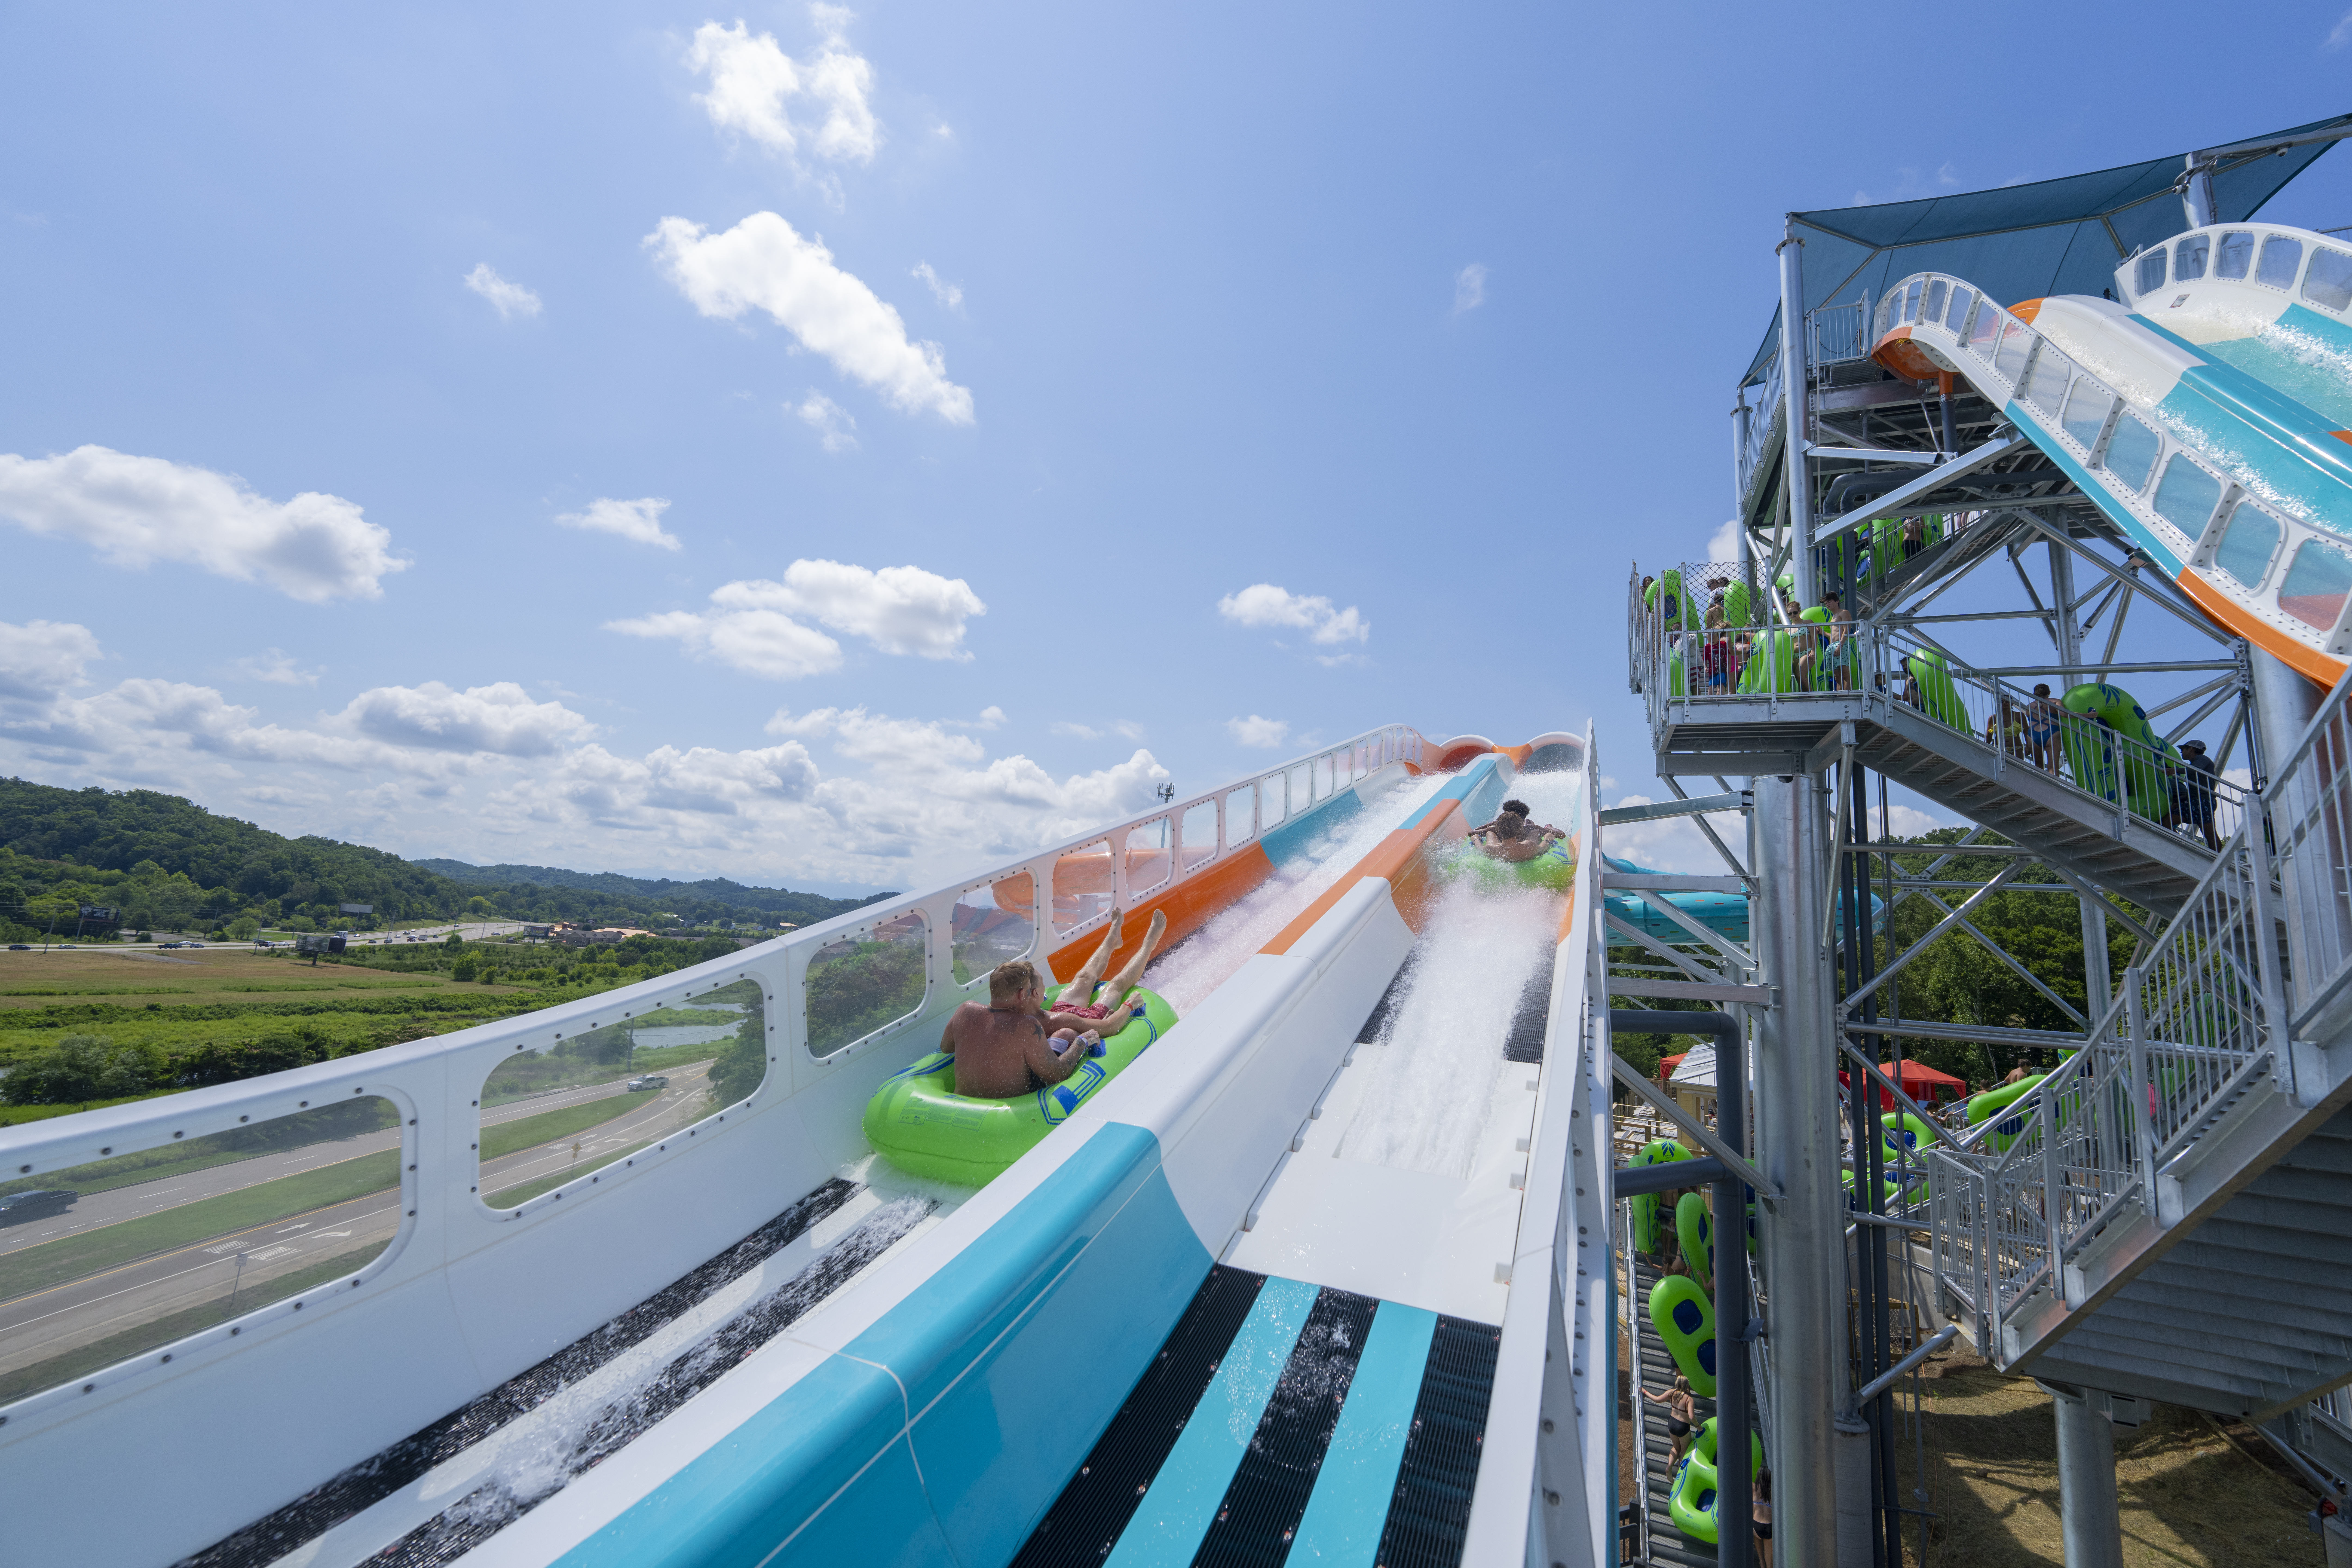 Riders in inner tubes going uphill on a side-by-side water coaster